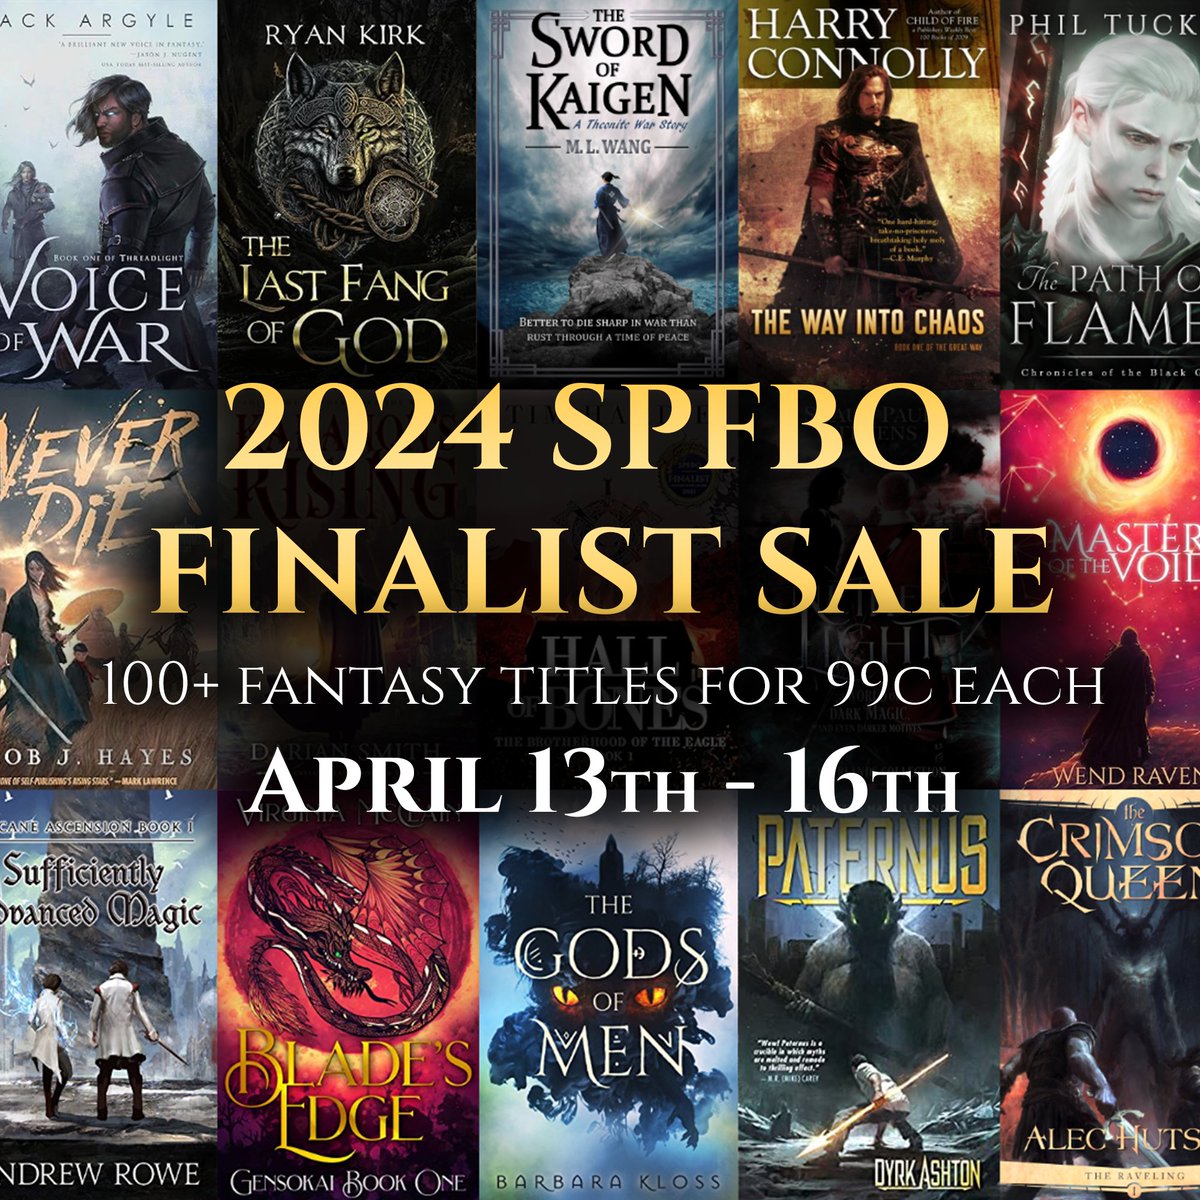 The 99p #SPFBO Finalists Sale, hosted by ML Wang, returns. Featuring some of the best fantasy titles from the last 9 years, this is a chance to add to your virtual bookshelves at a bargain price. My novels Hall of Bones and A Quiet Vengeance are both included. Details below 👇